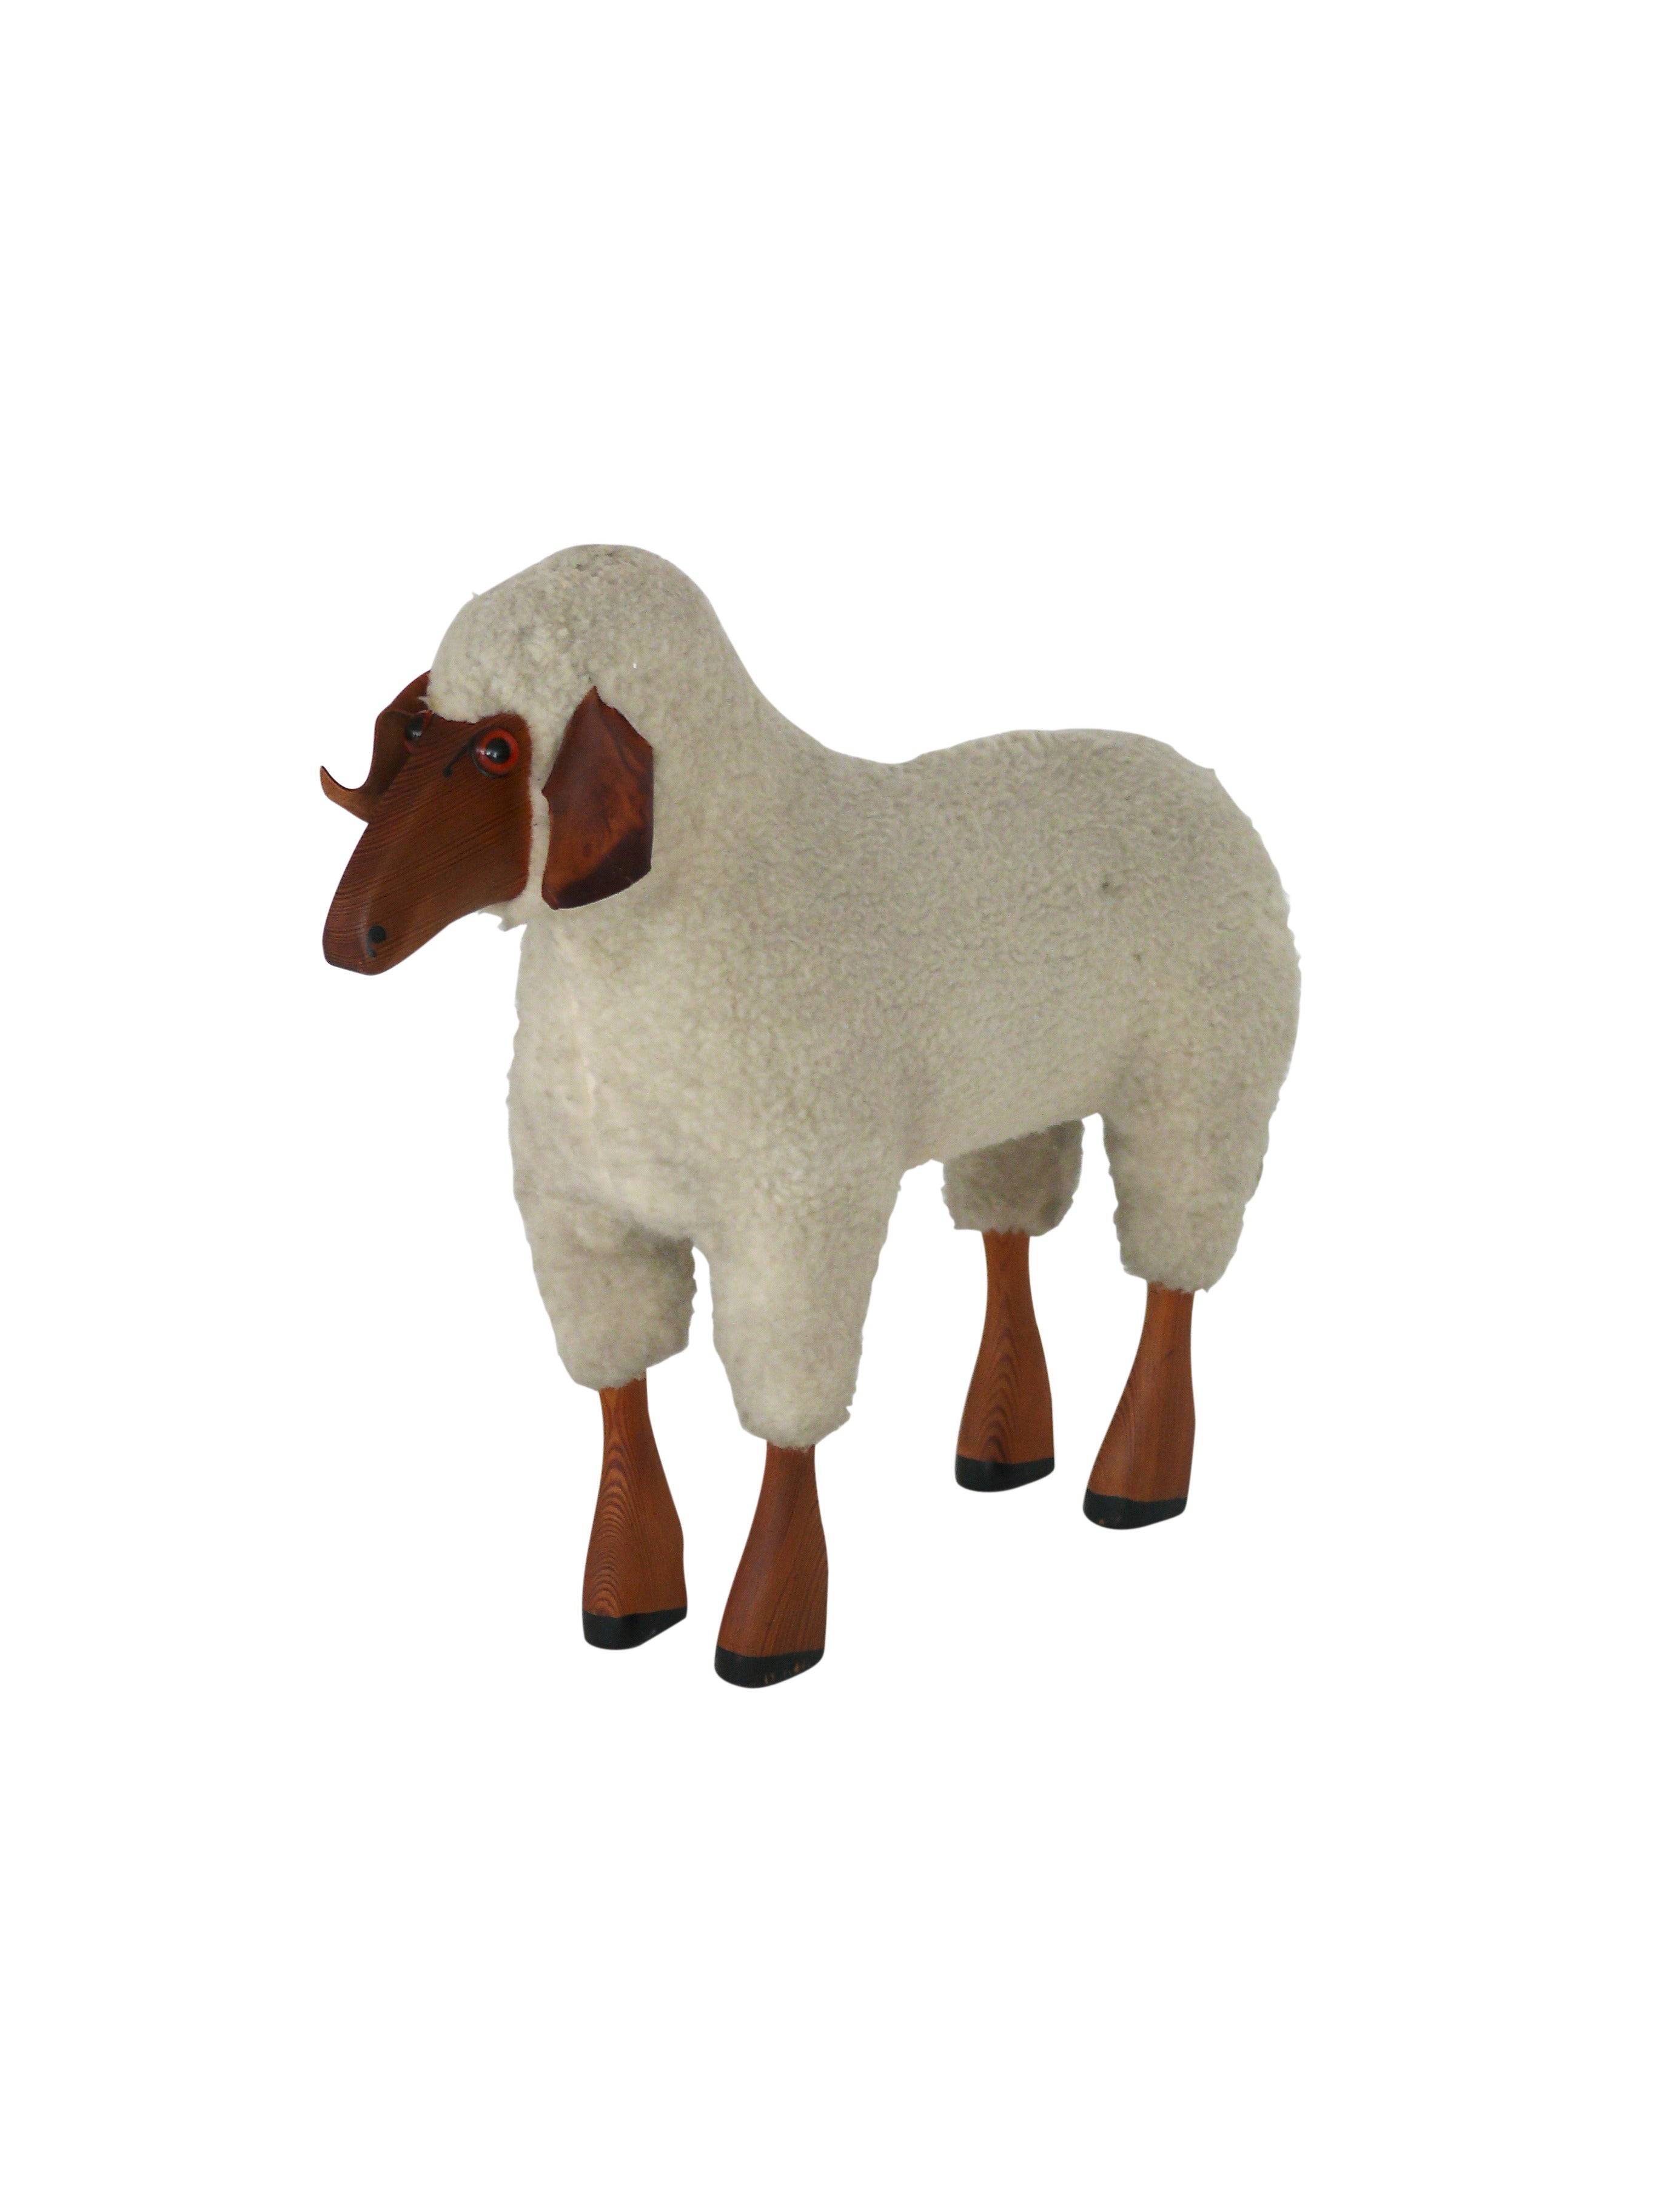 Vintage Sheep Sculpture in the Style of Francois- Xavier Lalanne